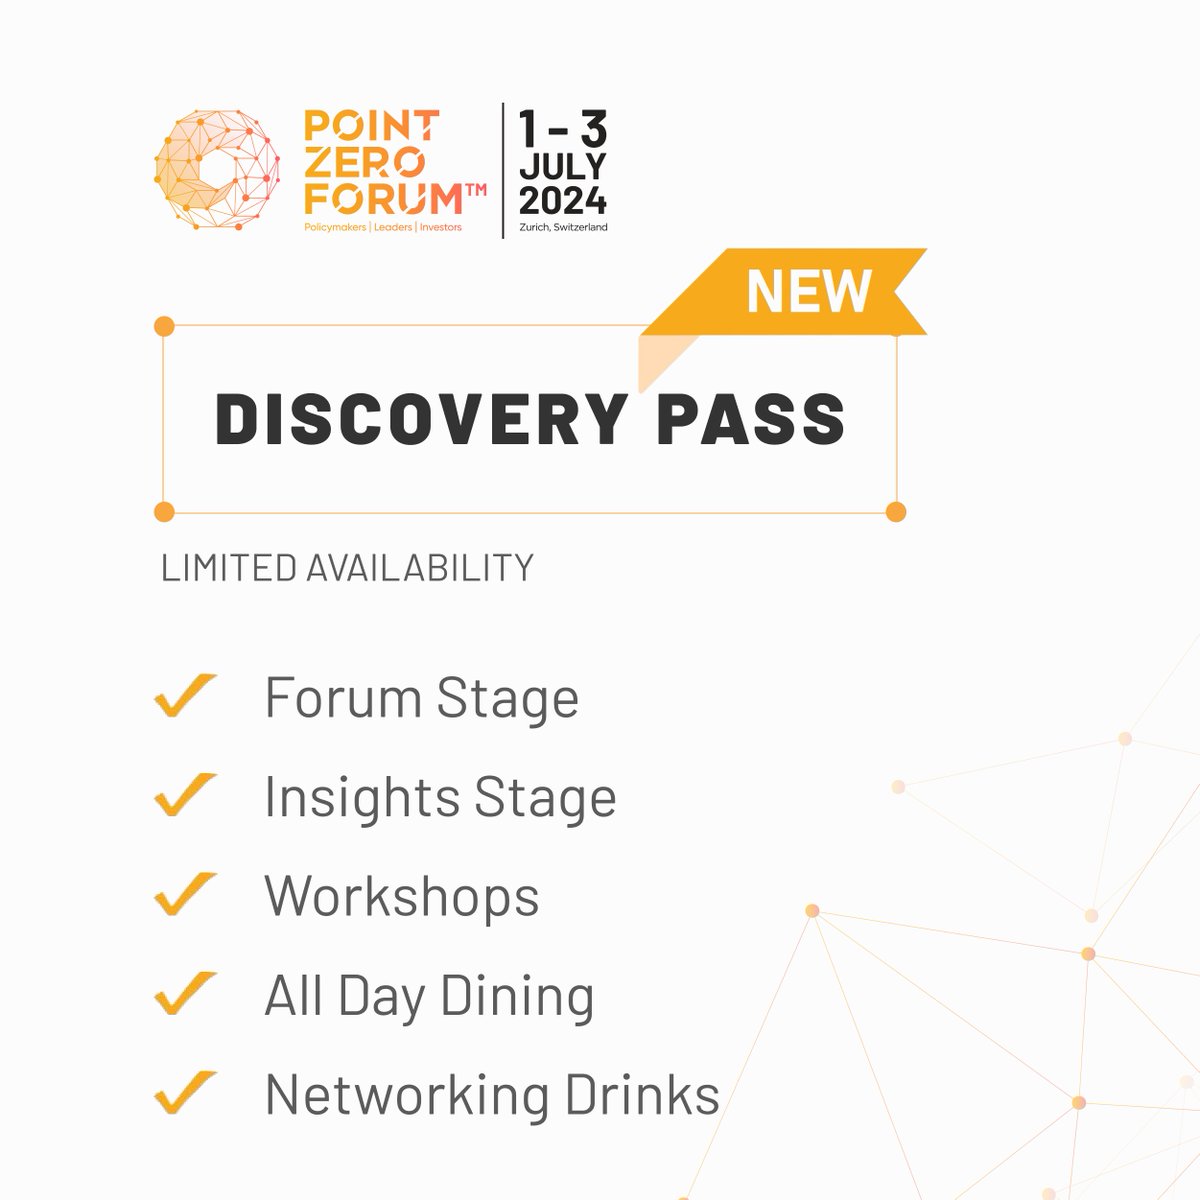 Is the Discovery Pass right for you? Deep dive into policy-tech progress in financial services for less! Only a limited number of €580 passes are available, so register your #PZF2024 pass now: hubs.ly/Q02s3qVq0 View agenda: hubs.ly/Q02s3qh30